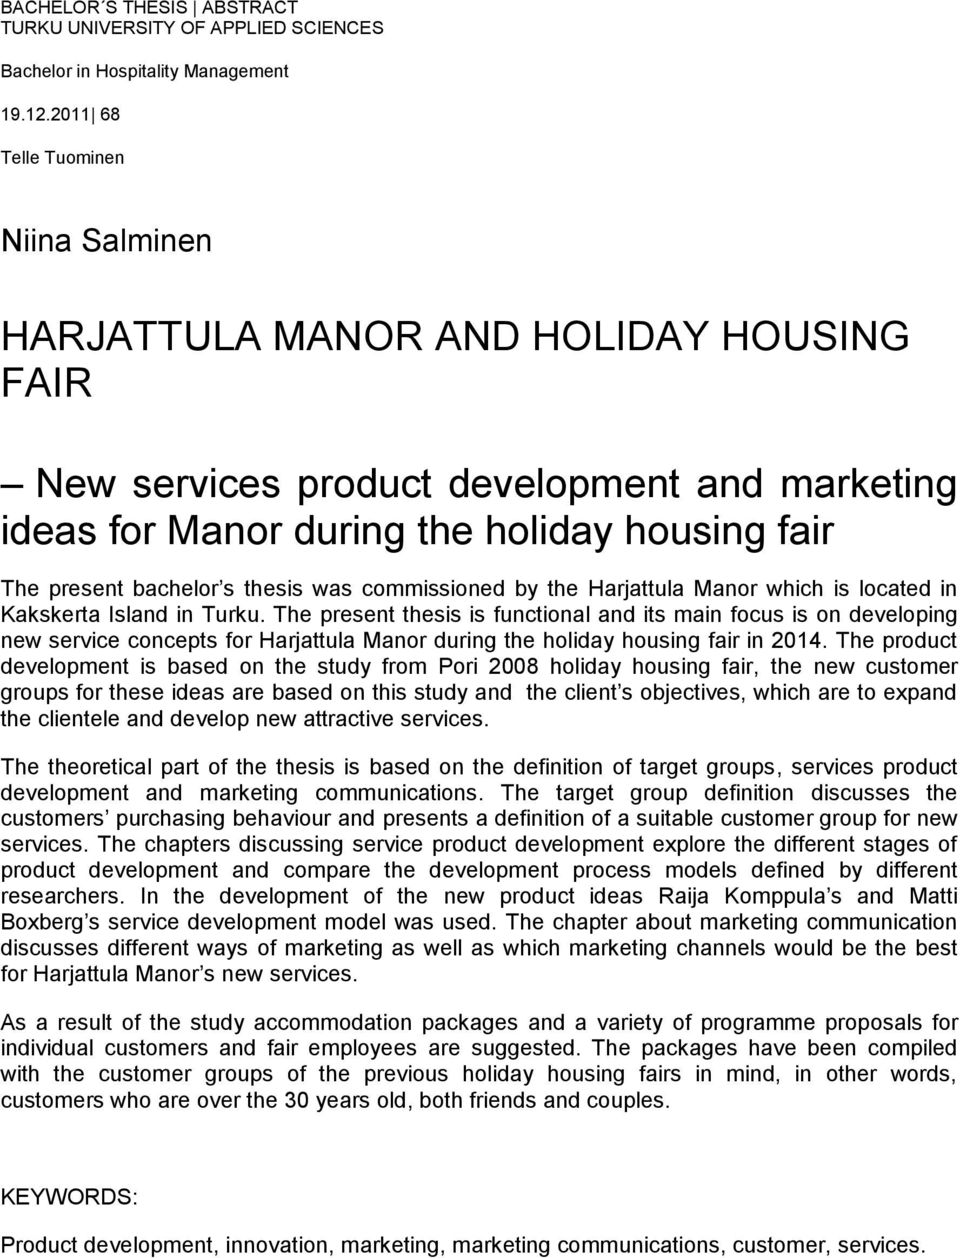 thesis was commissioned by the Harjattula Manor which is located in Kakskerta Island in Turku.